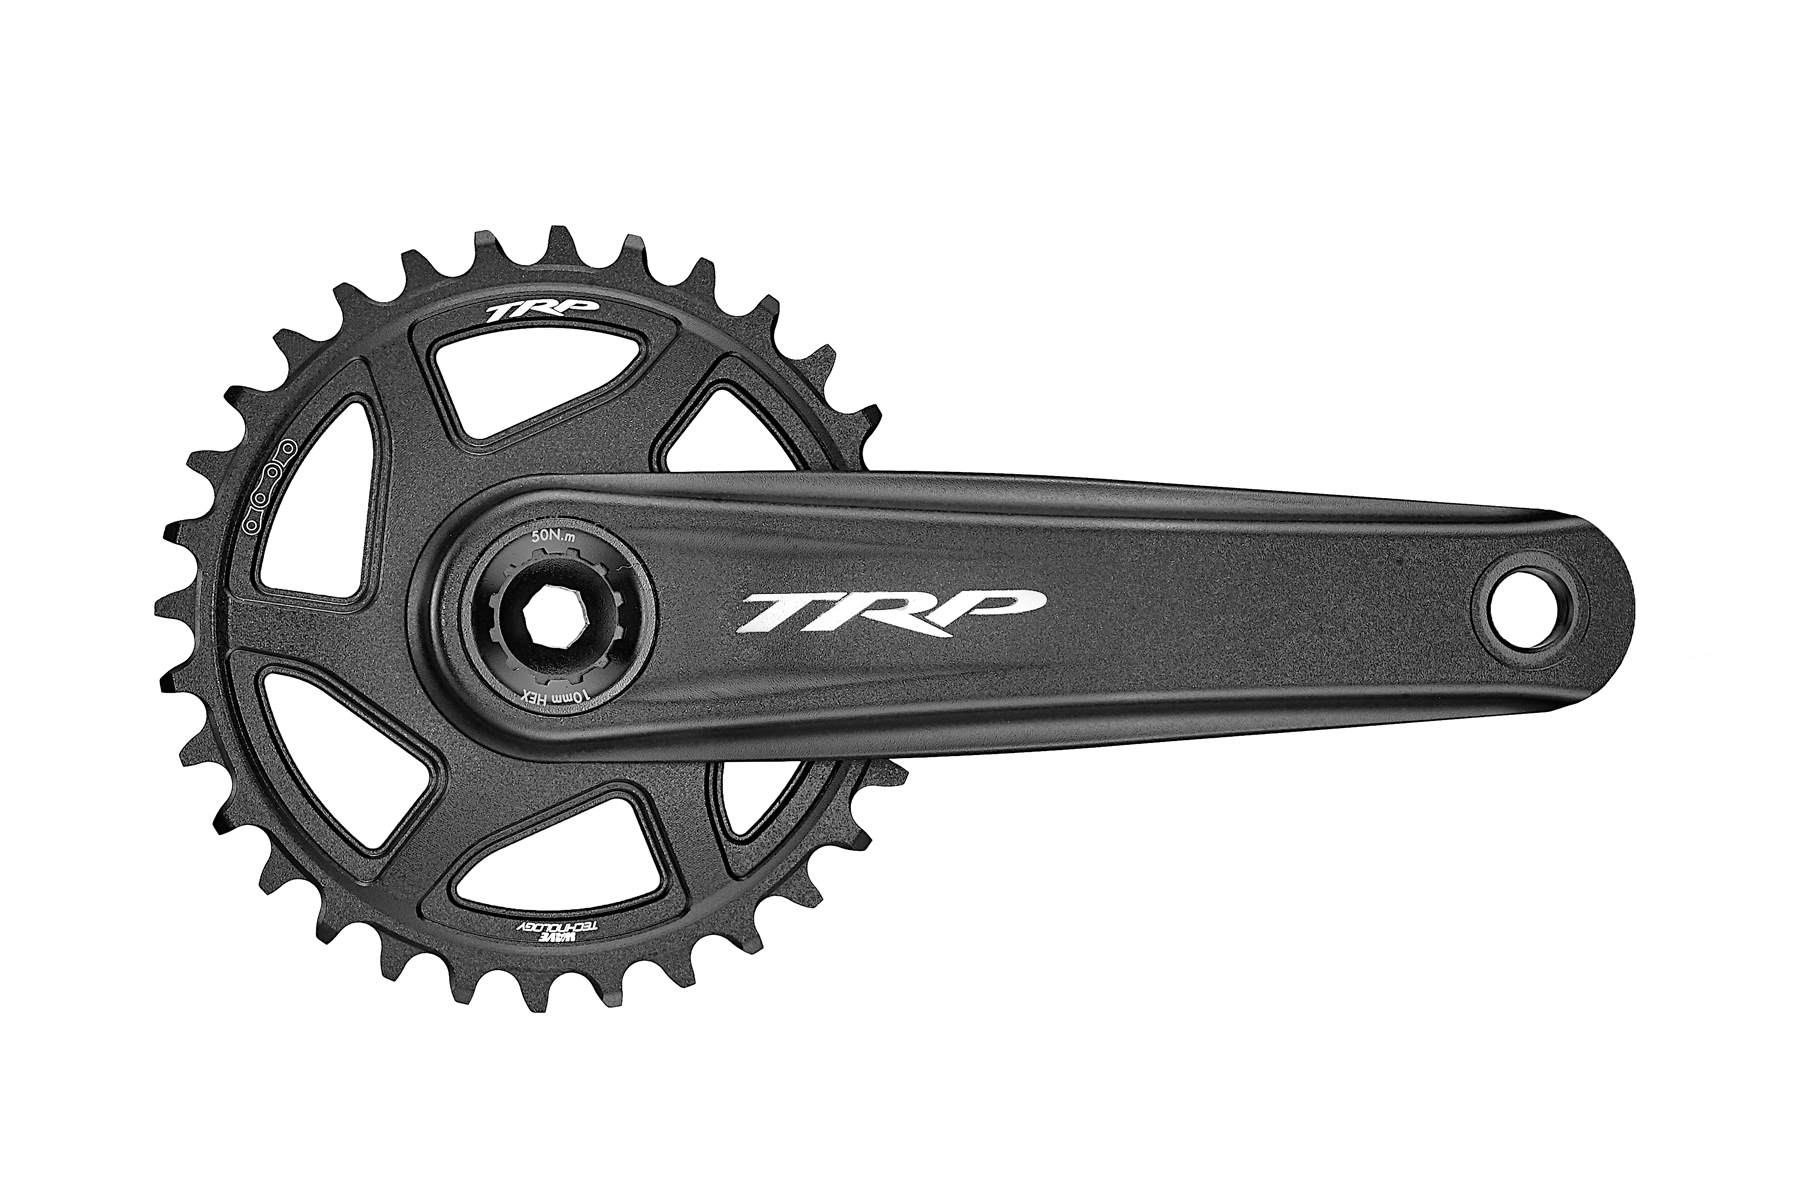 David Golay reviews the TRP Evo Groupsets for Blister